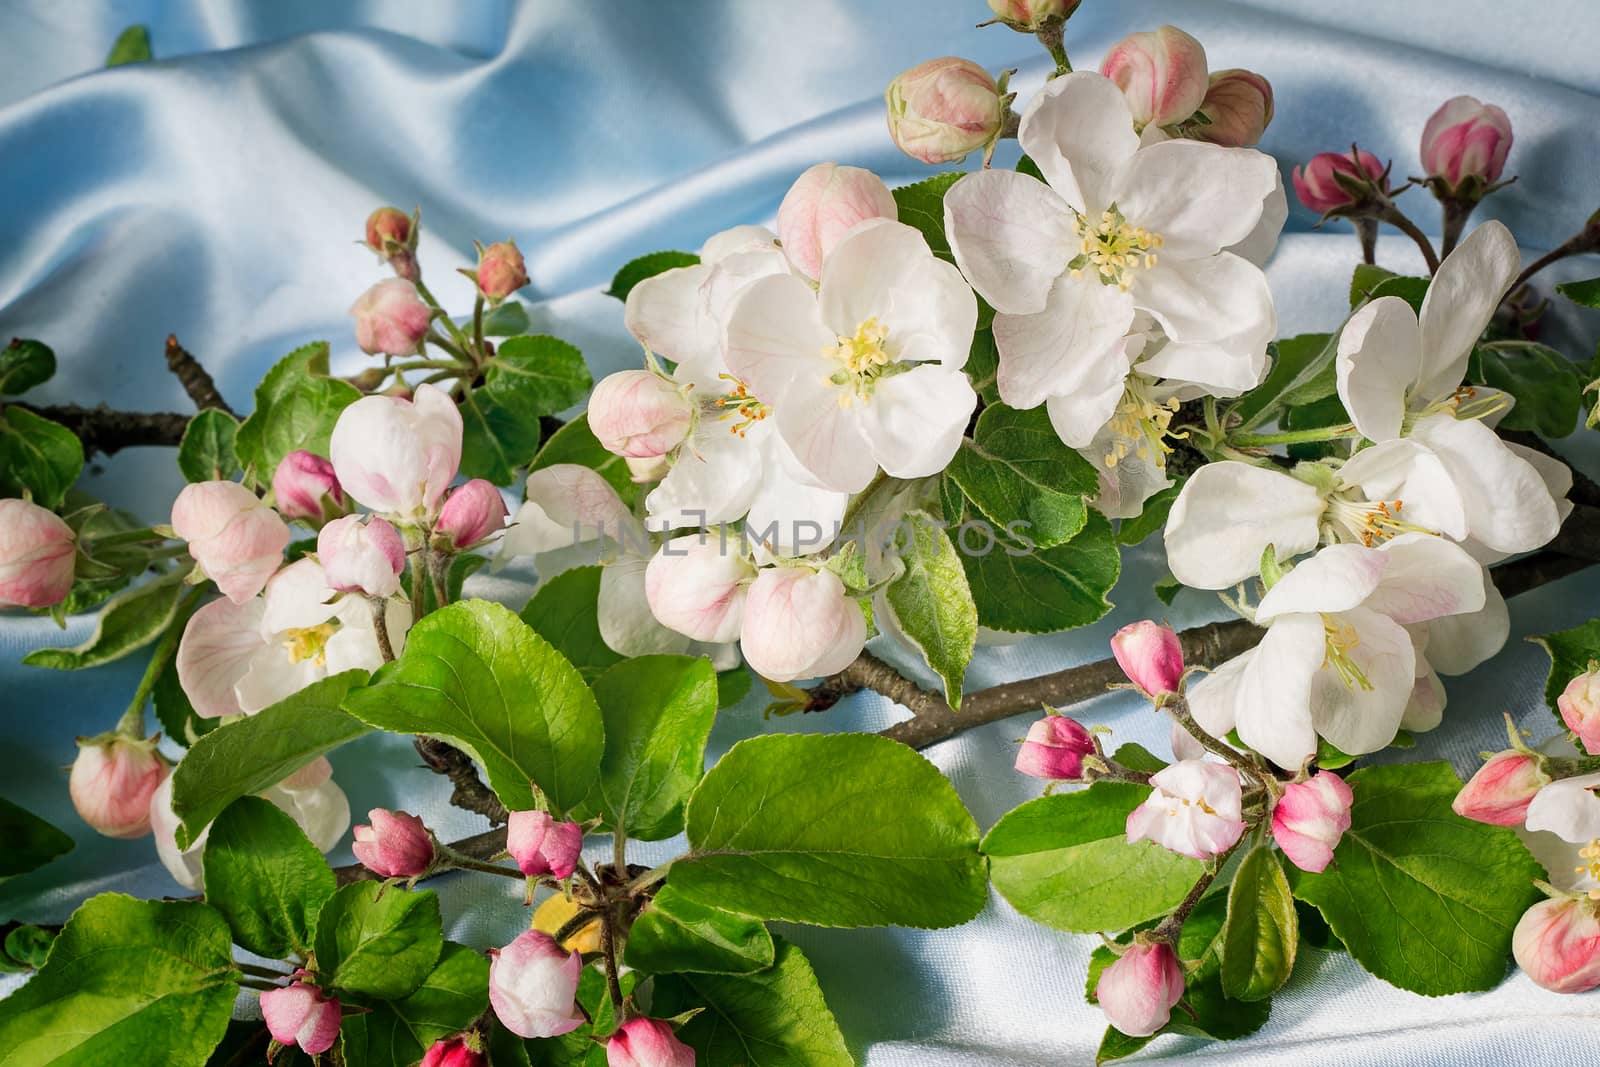 
Gentle white-pink flowers of an apple-tree, buds and green leaves on an apple-tree branch. Are presented on a gentle-blue background